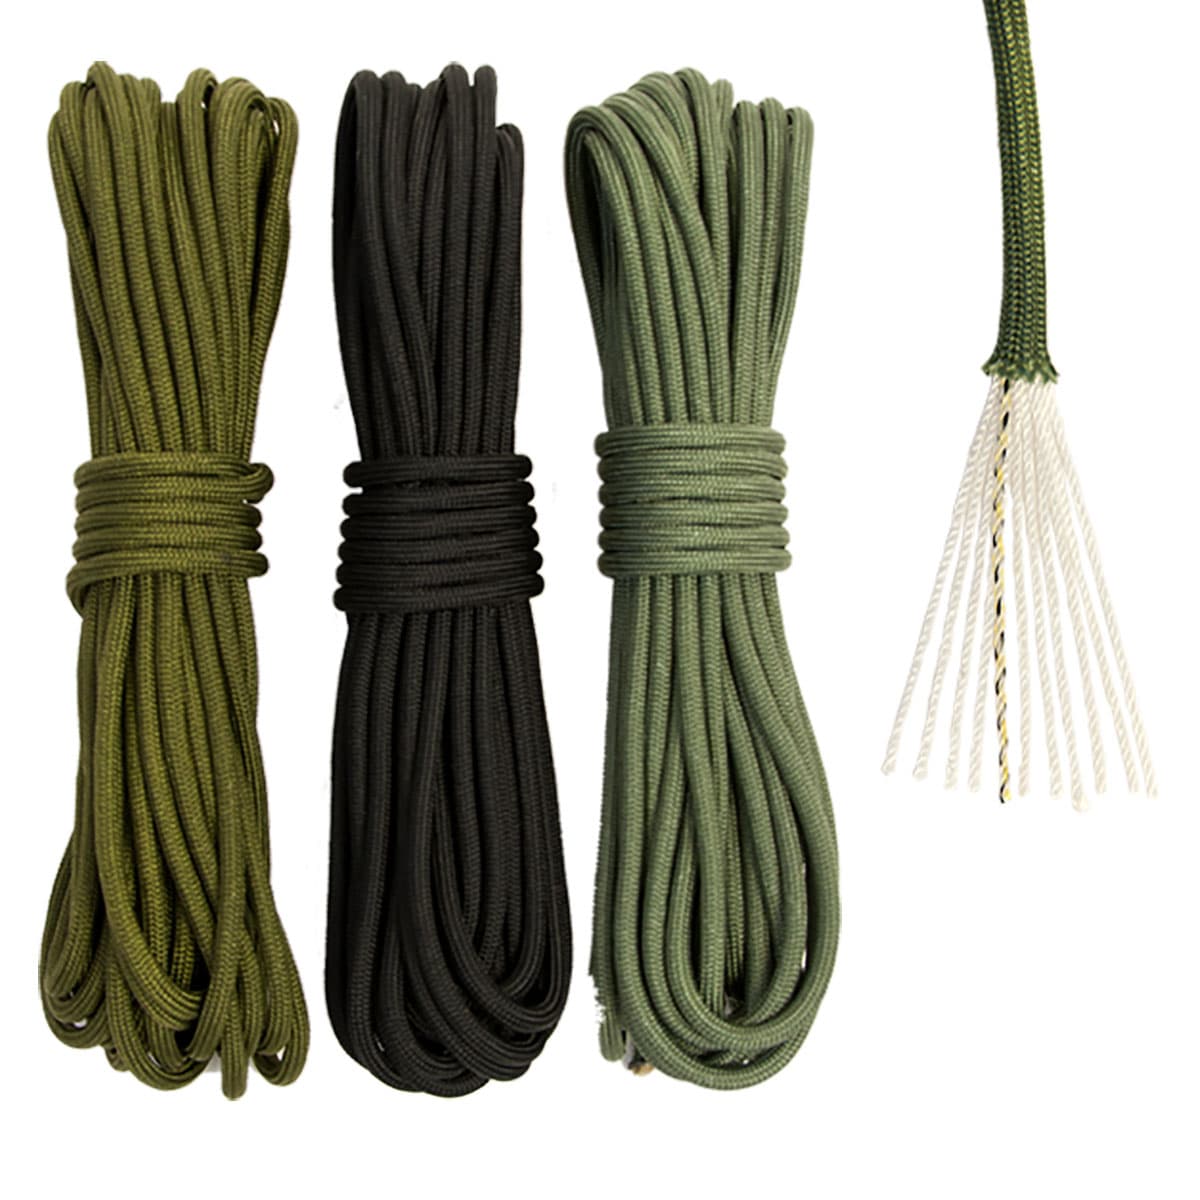 Camping Hiking Military Gear Survival Emergency Rope TECEUM Paracord Type IV 750 lb 100% Nylon MIL-SPEC 50' 100' 200' & 1000 ft 20 Heavy-Duty Tactical Parachute Cord Colors 